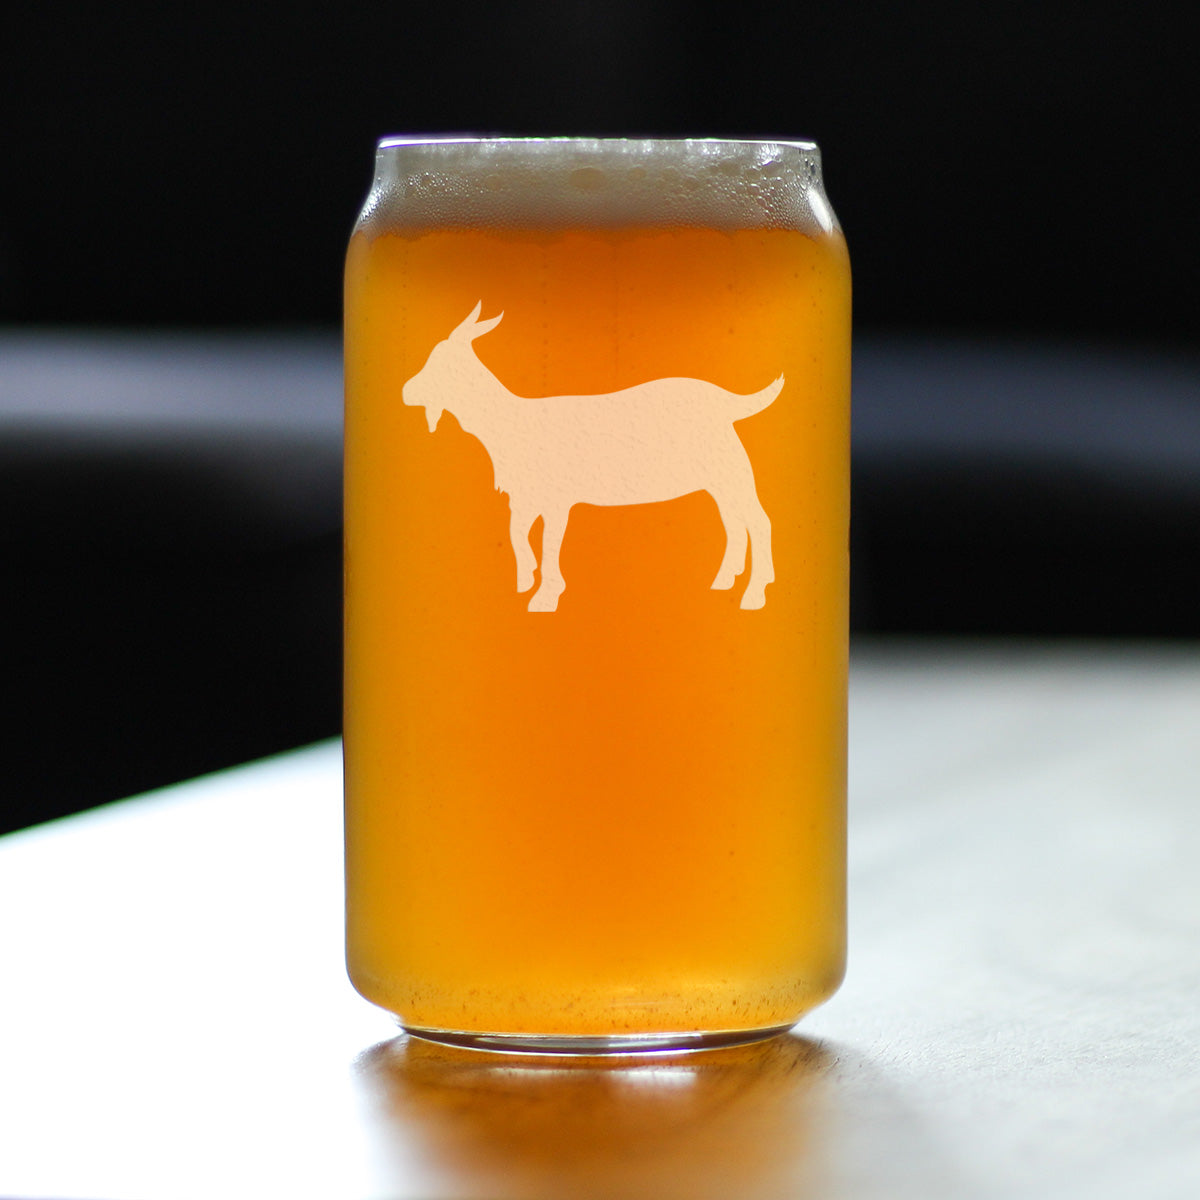 Goat Silhouette - Cute Beer Can Pint Glass, 16 Oz, Etched Designs - Farmhouse Décor Gifts for Lovers of Goats and Beer